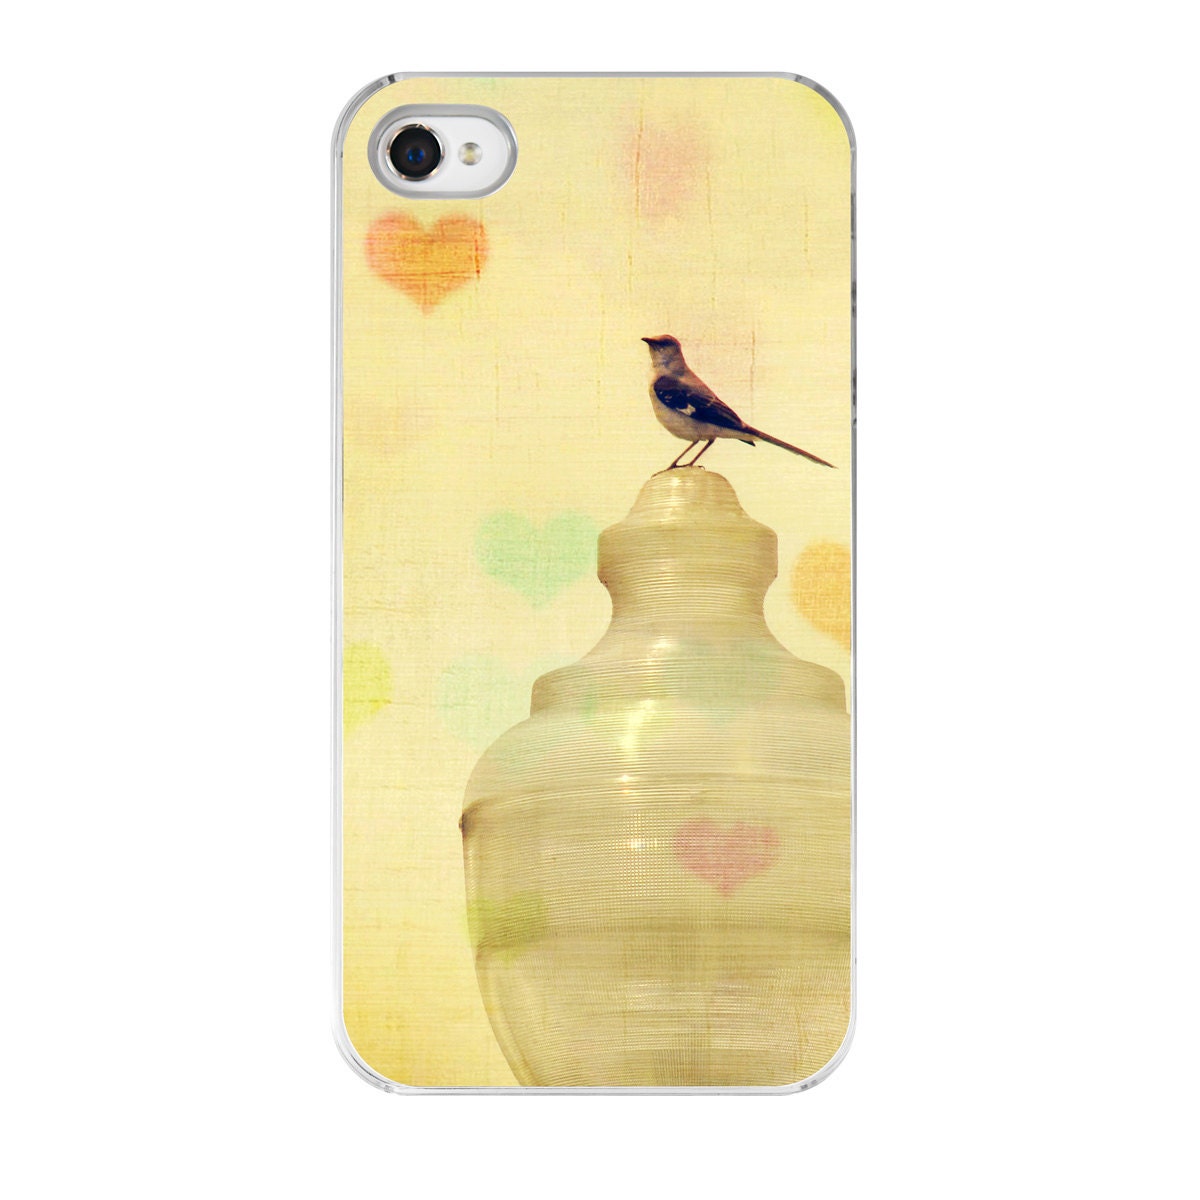 Bird iPhone Case, iPhone 5 Case, iPhone 4 Case, iPhone 4s Case, Shabby Chic Bird iPhone Cover, Yellow, Heart, Hearts, Pretty, Cottage Chic - AmyTylerPhotography